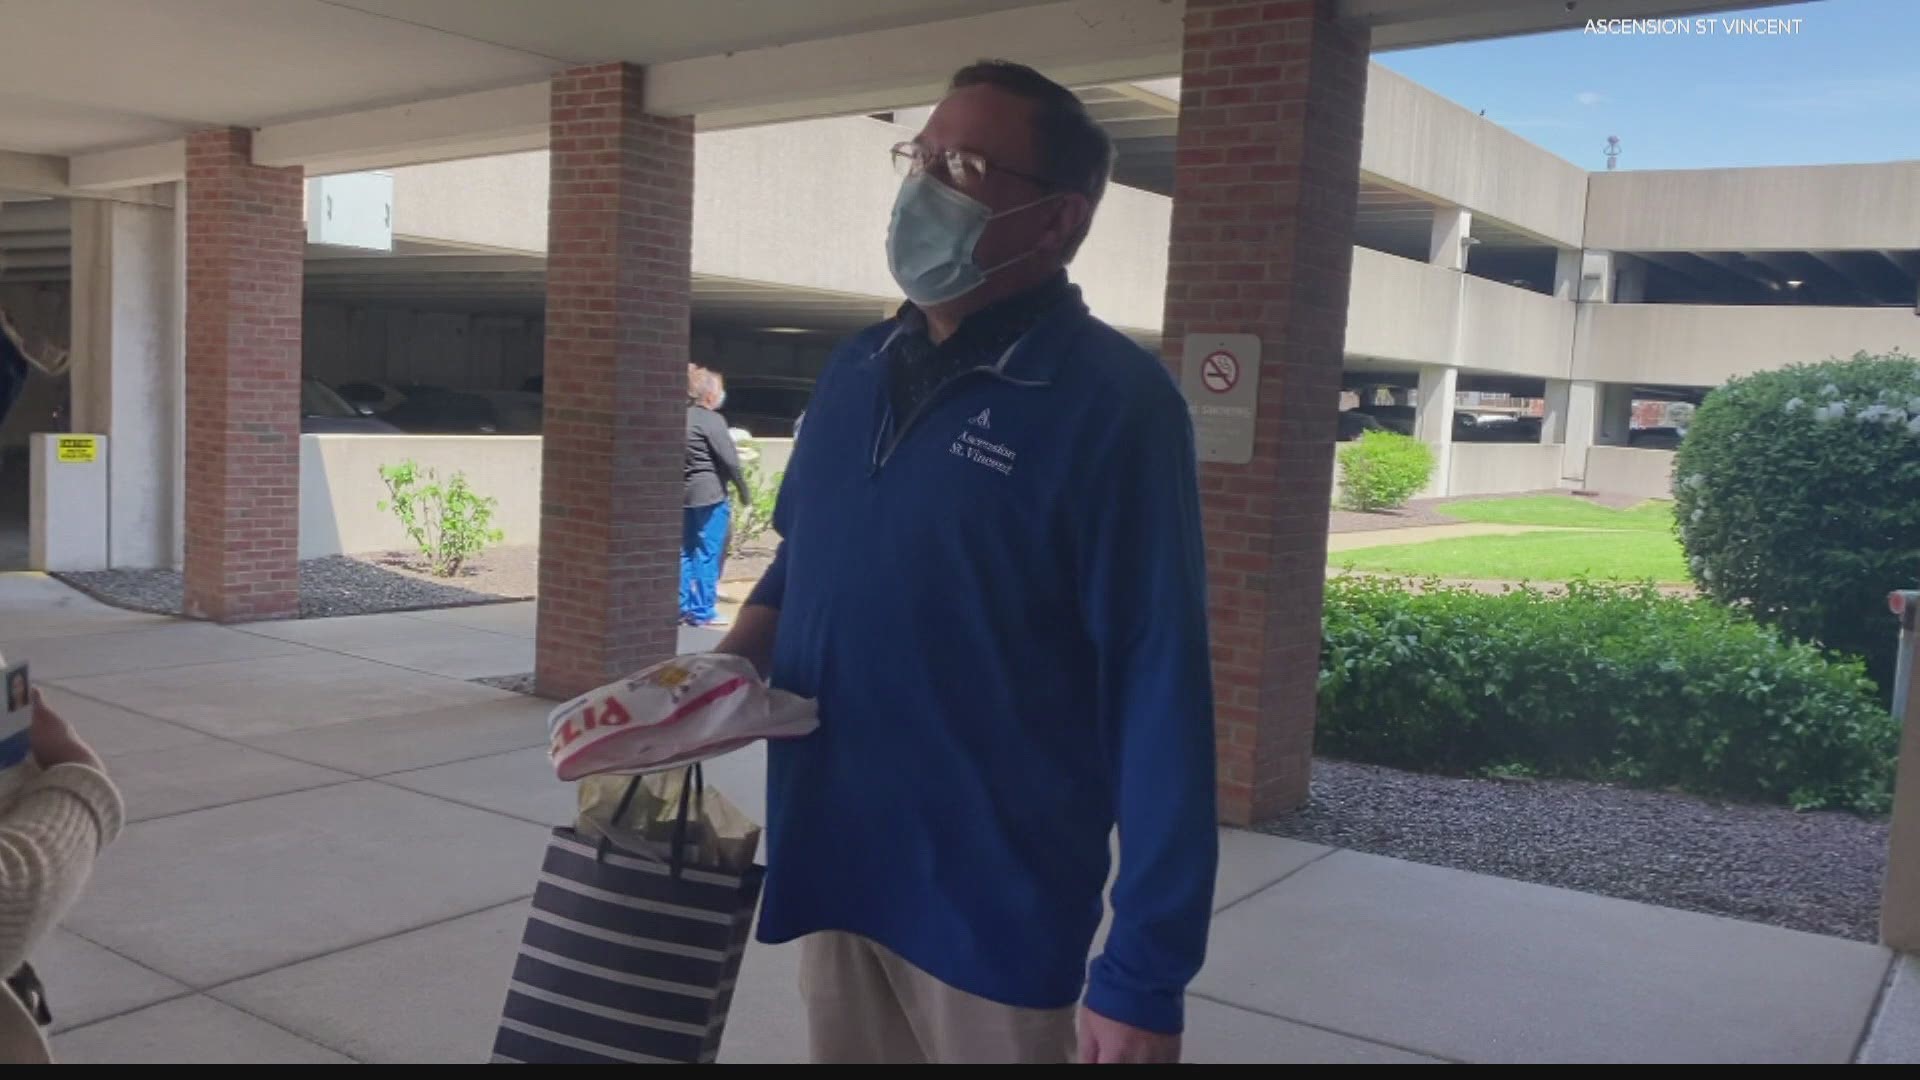 David Skeels hit the road for southwest Indiana to help fill the need for volunteers at vaccination clinics in the Evansville area.